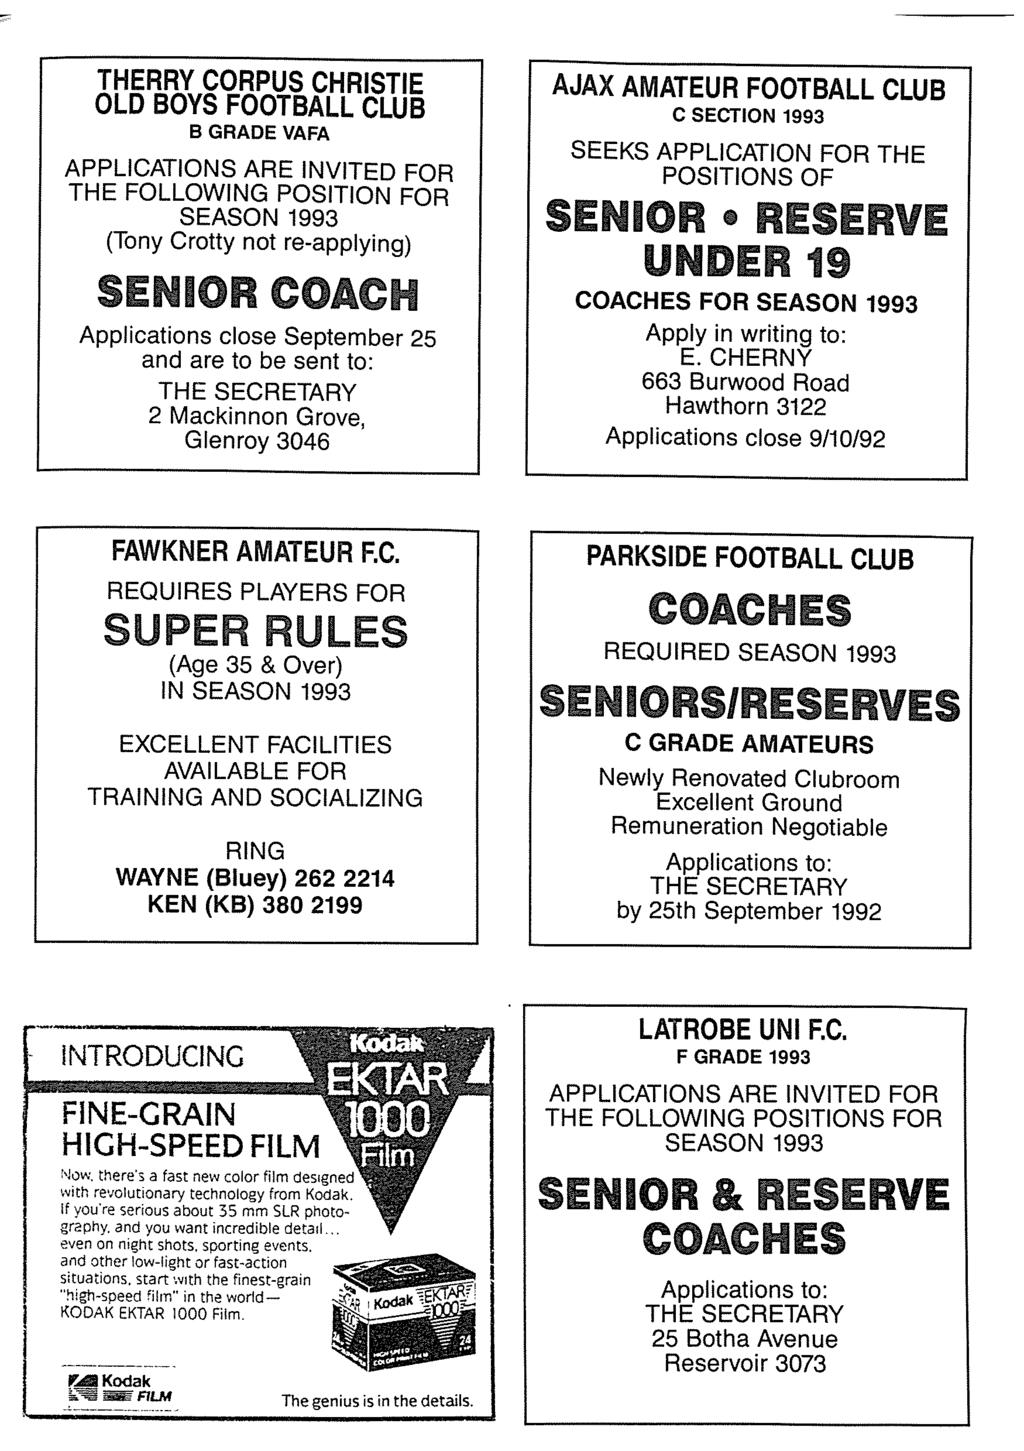 THERRY CORPUS CHRISTIE OLD BOYS FOOTBALL CLUB B GRADE VAFA APPLICATIONS ARE INVITED FOR THE FOLLOWING POSITION FOR SEASON 1993 (Tony Crotty not re-applying) Applications close September 25 and are to